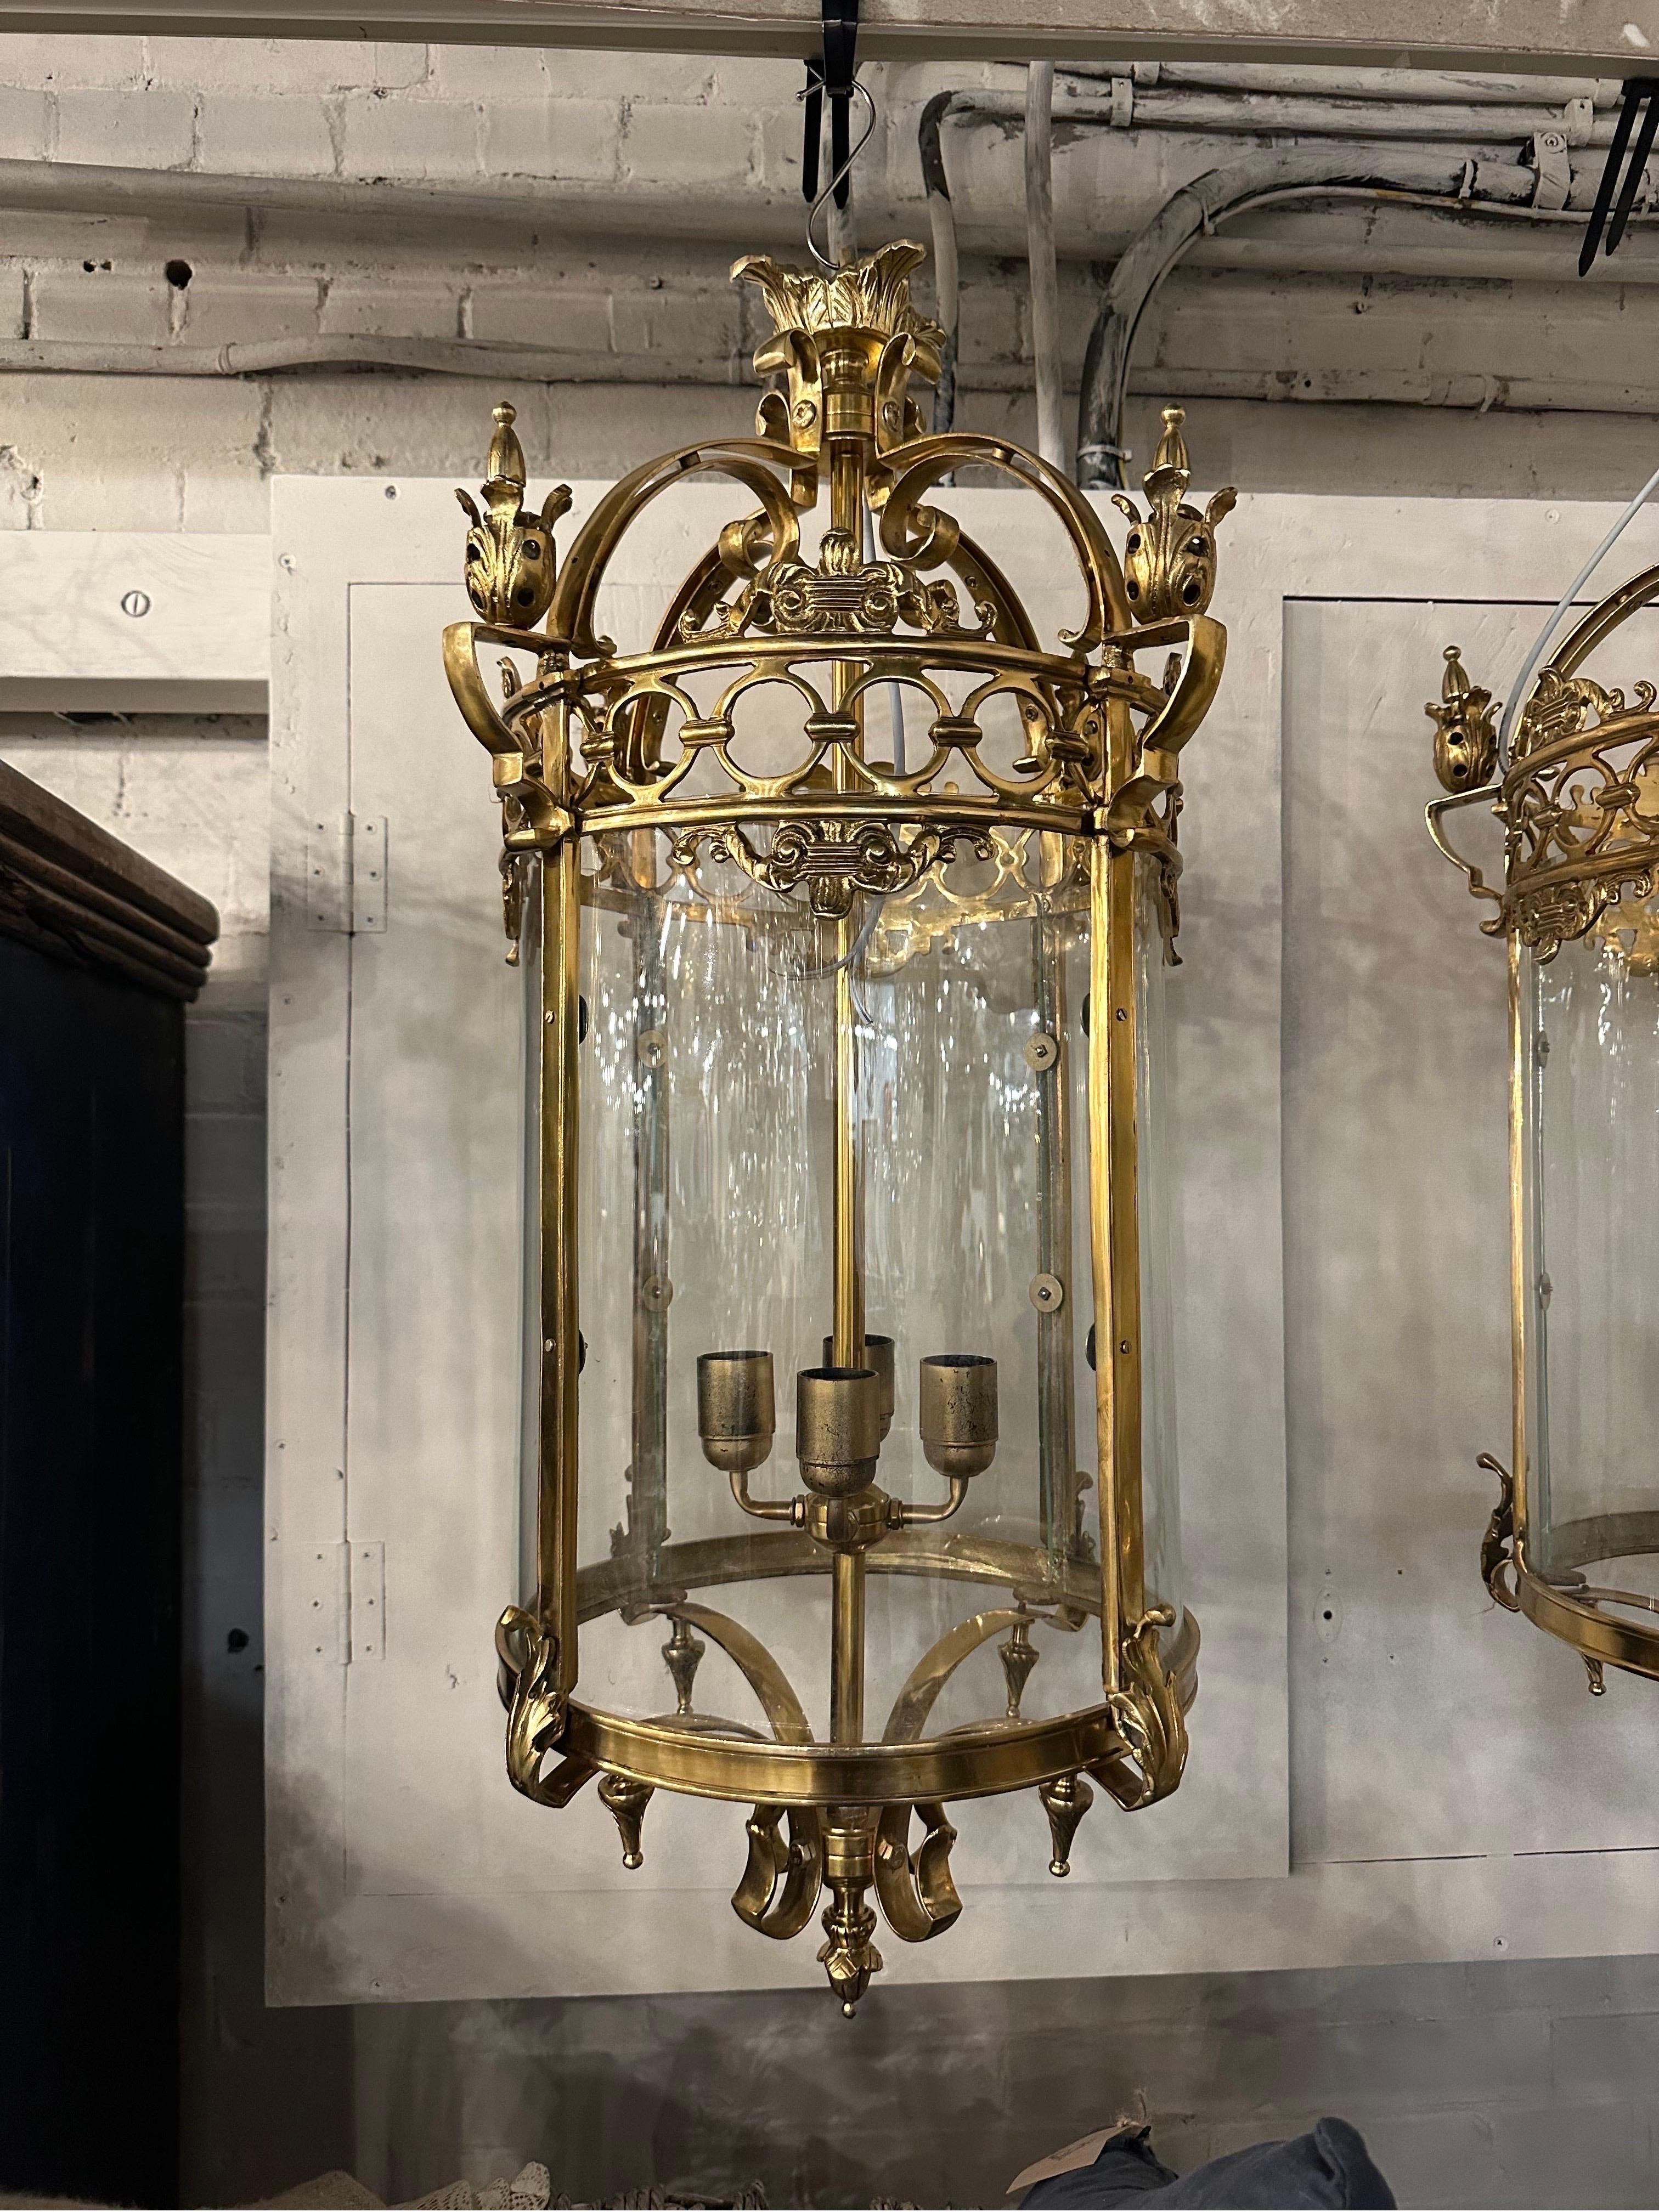 Introducing a pair of Dutch antique lanterns that will transport you back in time to the enchanting streets of Amsterdam. 

These exquisite lanterns are a true testament to the craftsmanship and beauty of Dutch design. Handcrafted with precision and